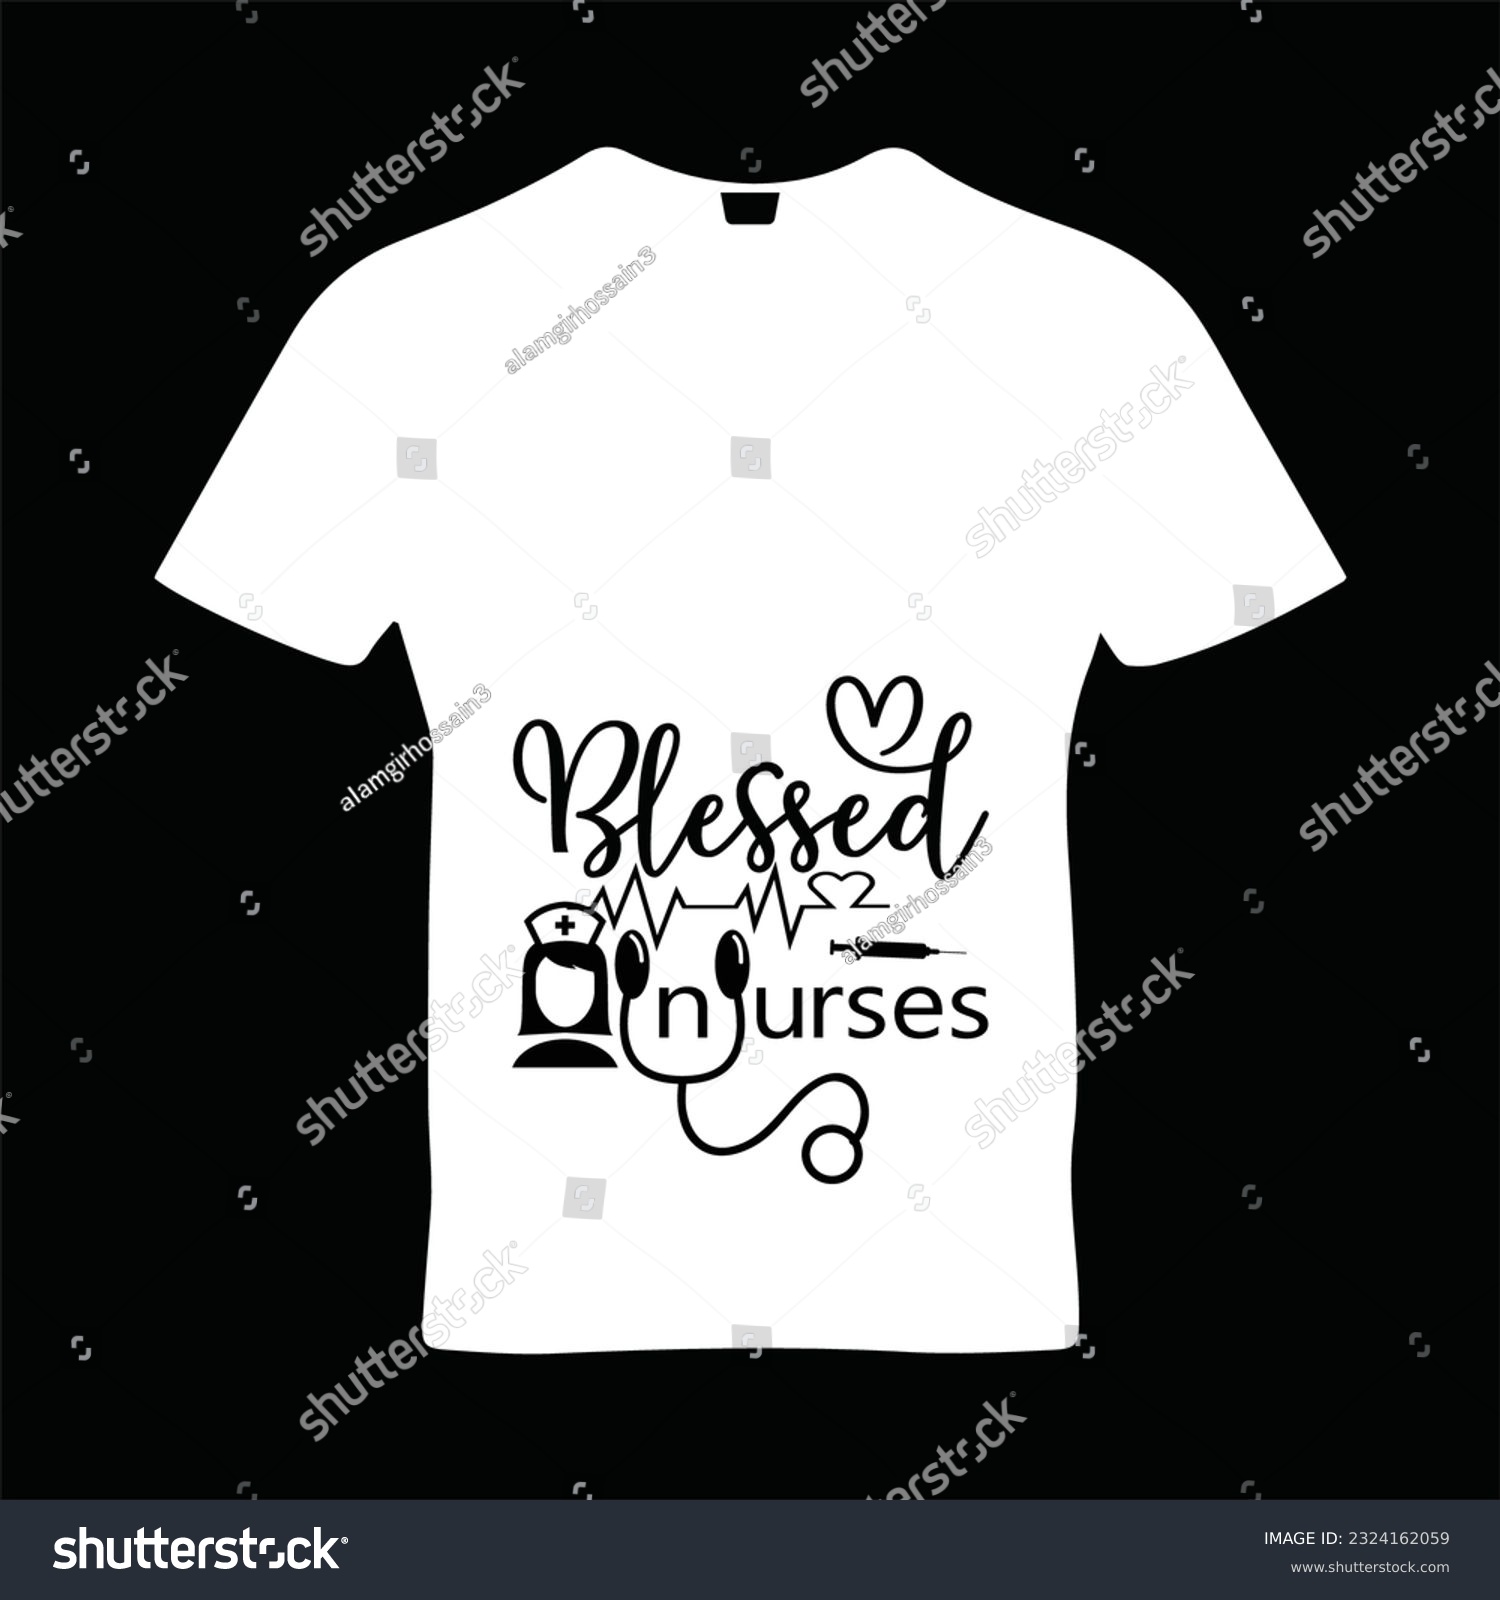 SVG of Nurses 2 t-shirt design. Here You Can find and Buy t-Shirt Design. 
Digital Files for yourself, friends and family, or anyone who supports your Special Day and Occasions. svg